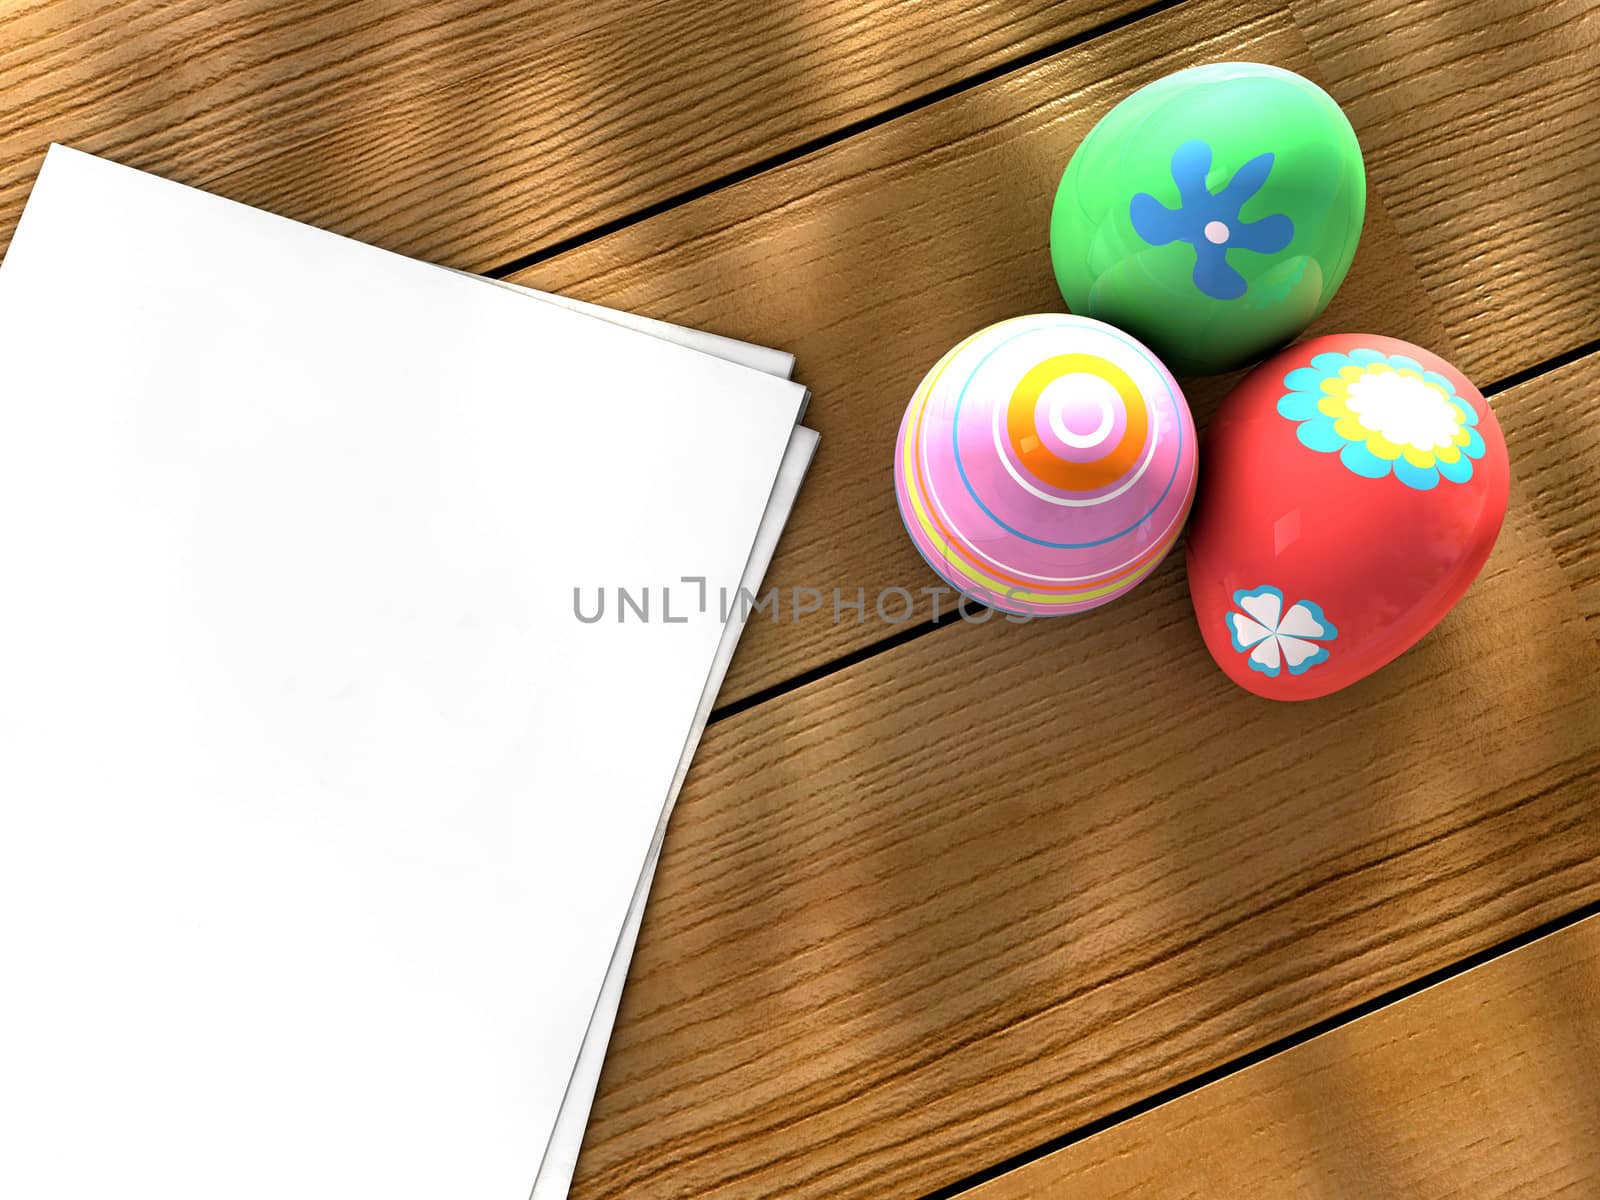 Colorful Easter eggs on a table next to notebook sheets